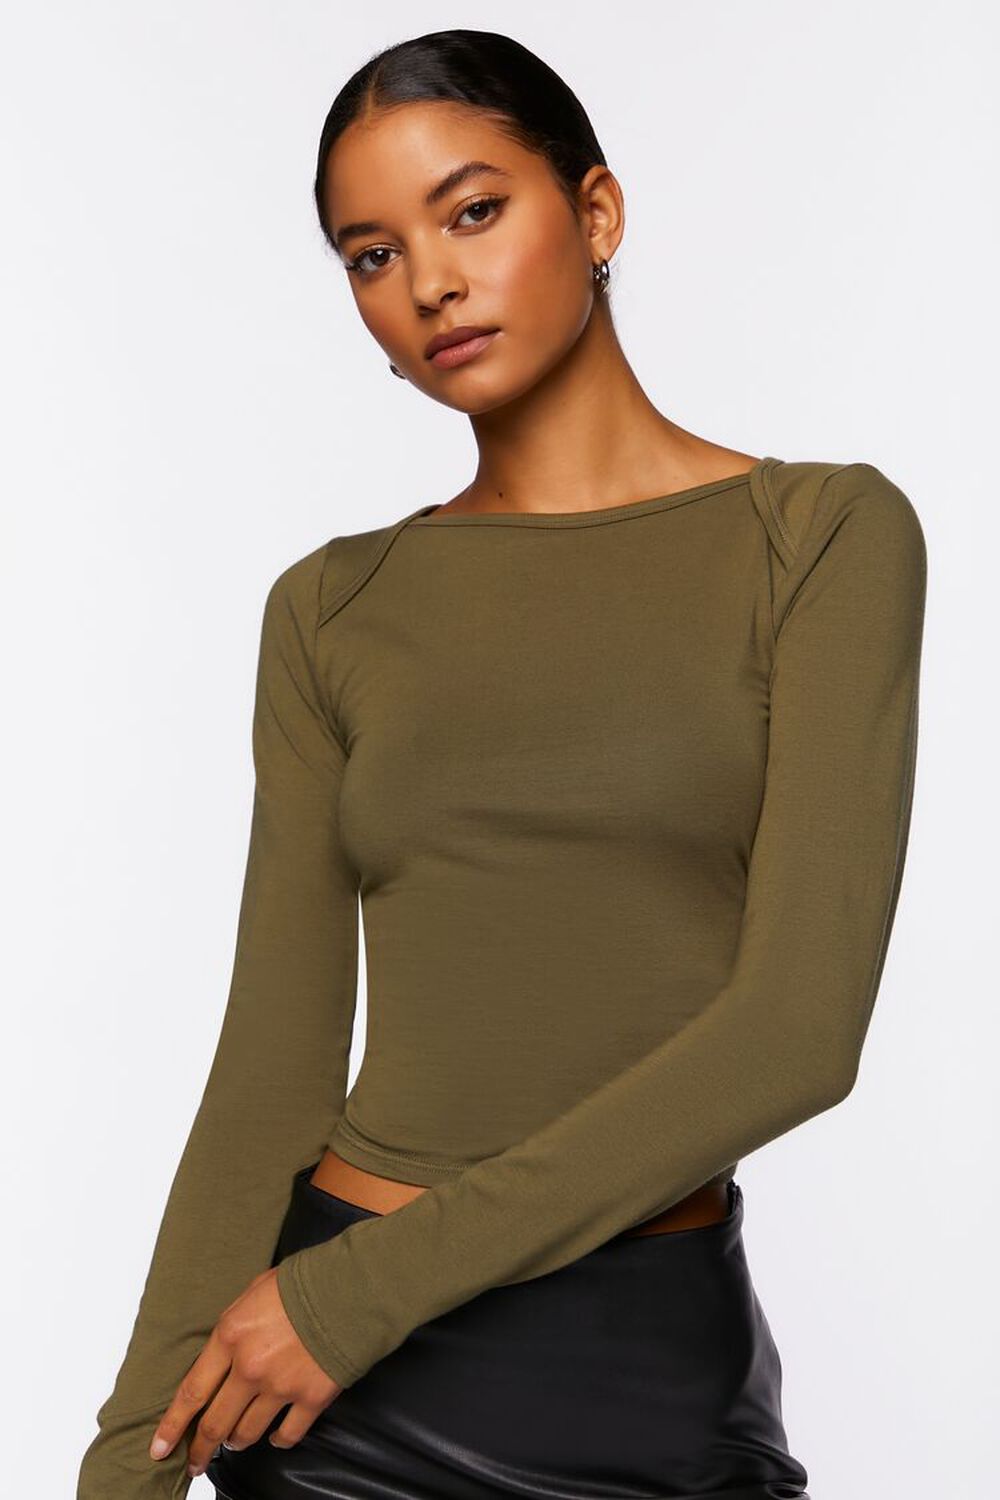 OLIVE Ruched Long-Sleeve Tee, image 1